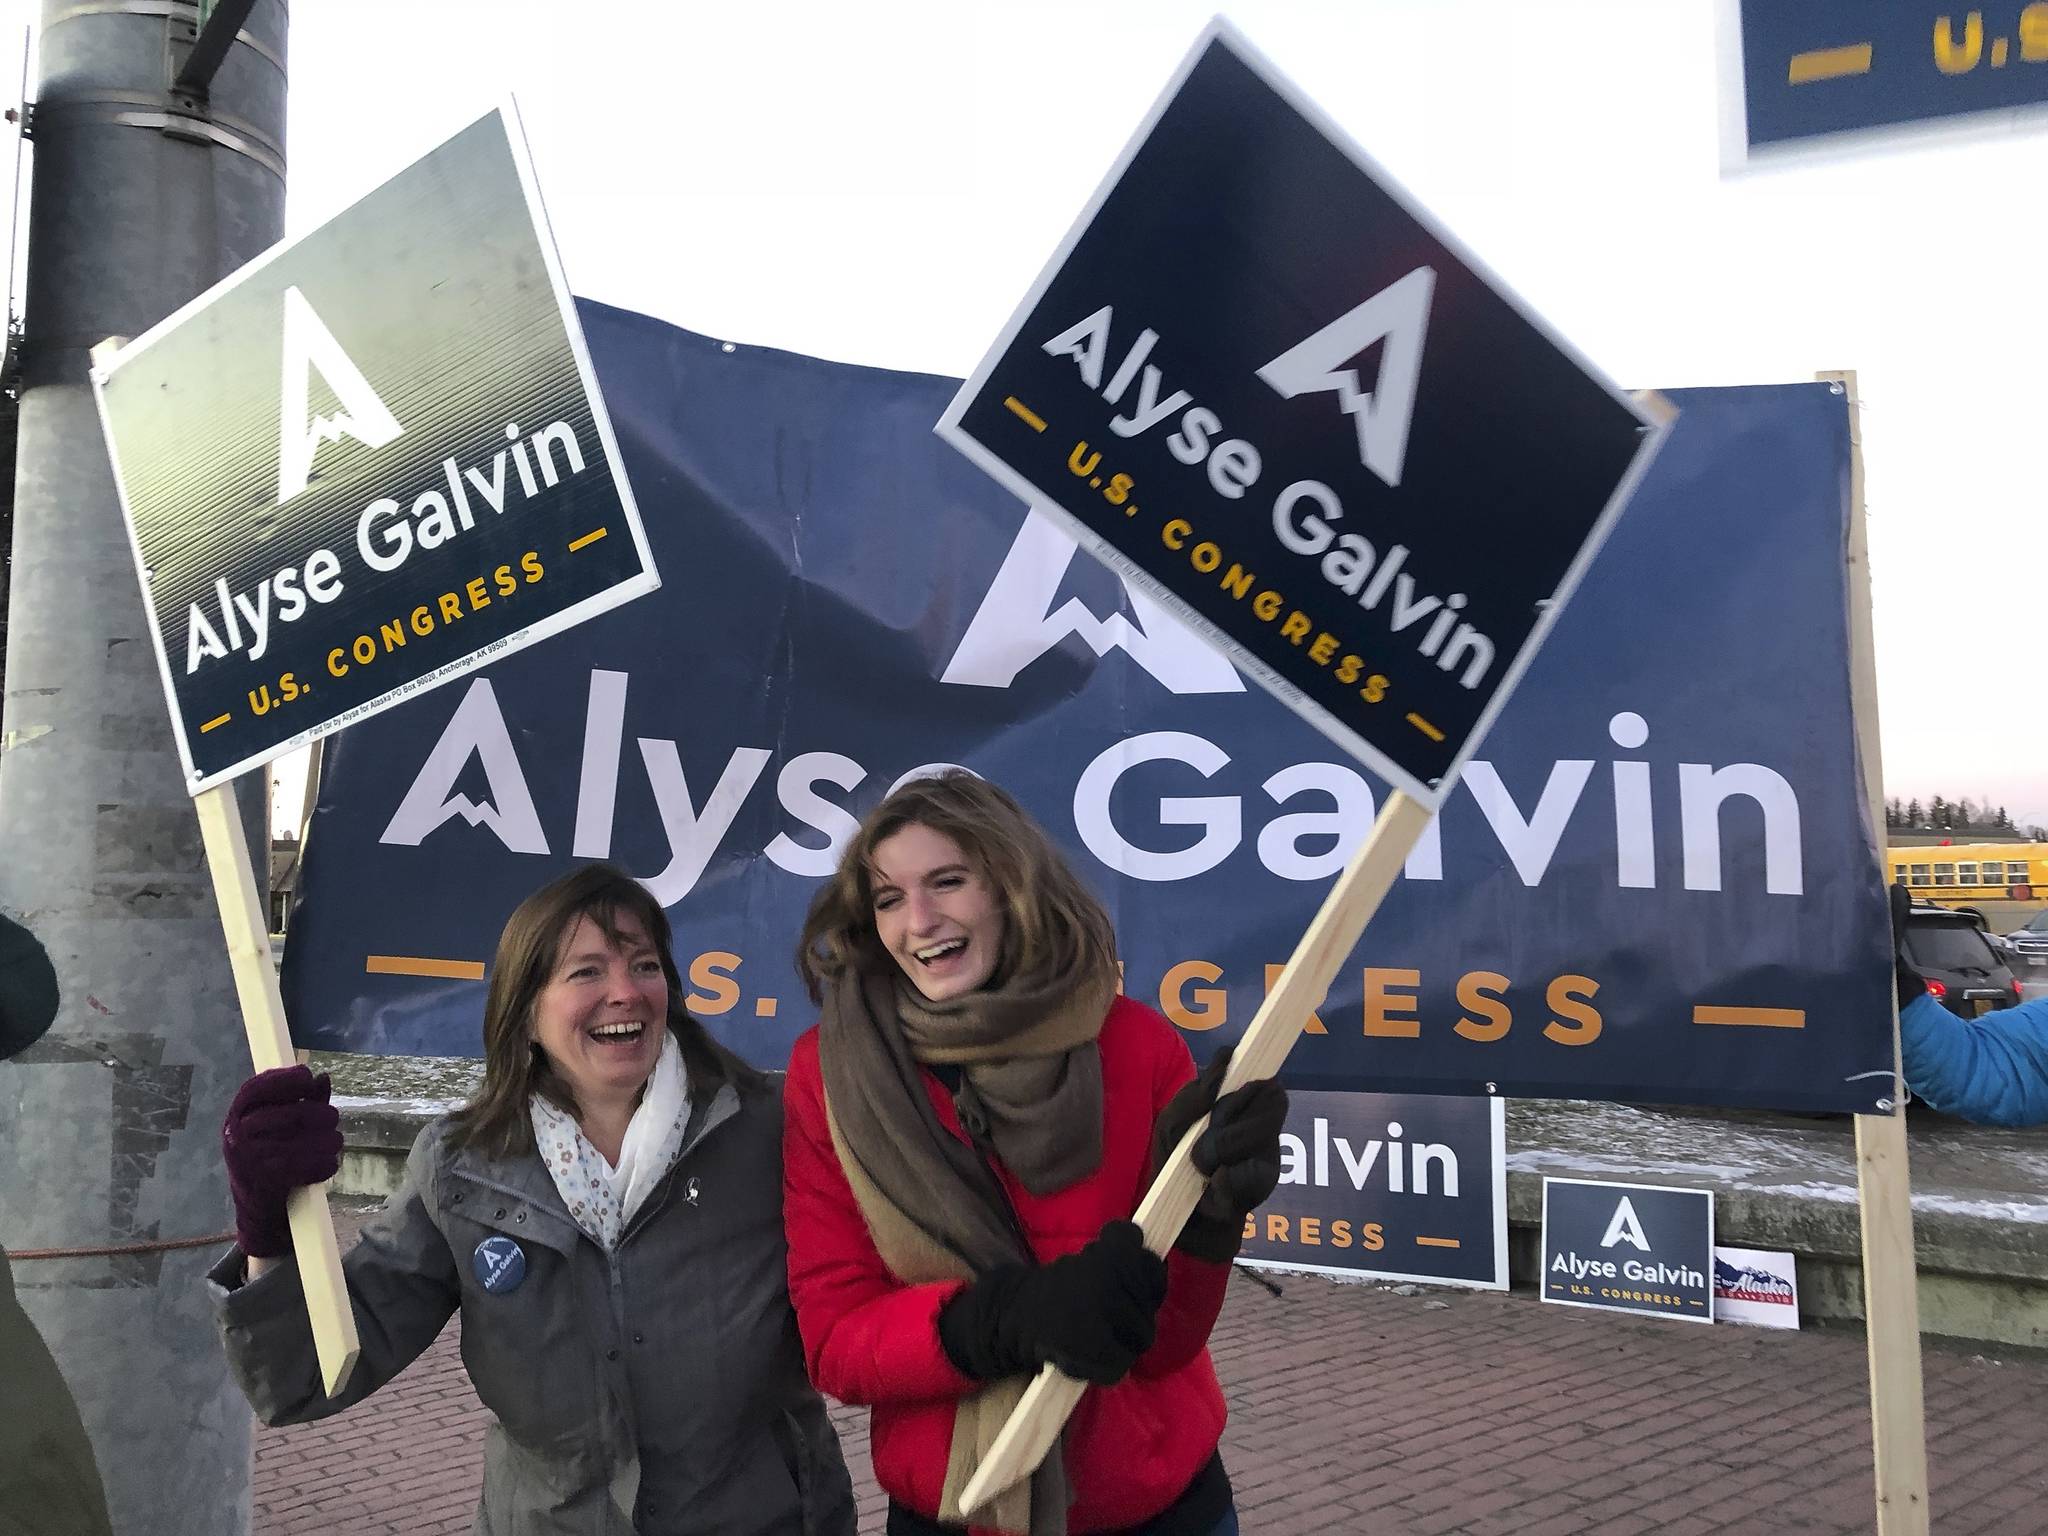 Alaska U.S. House candidate Alyse Galvin, left, and her daughter Bridget wave signs on the corner of a busy street in Anchorage in November 2018. Galvin, an Independent candidate, is challenging Republican U.S. Rep. Don Young. Young, the longest-ever serving Republican in the House, has not agreed to participate in many debates or forums this fall. “He’s dodging, he’s ducking debates because he’s afraid to talk the issues that Alaskans really care about most,” Galvin said Thursday, Oct. 1, 2020, of her 87-year-old opponent who has been in office since 1973. (AP Photo / Becky Bohrer)